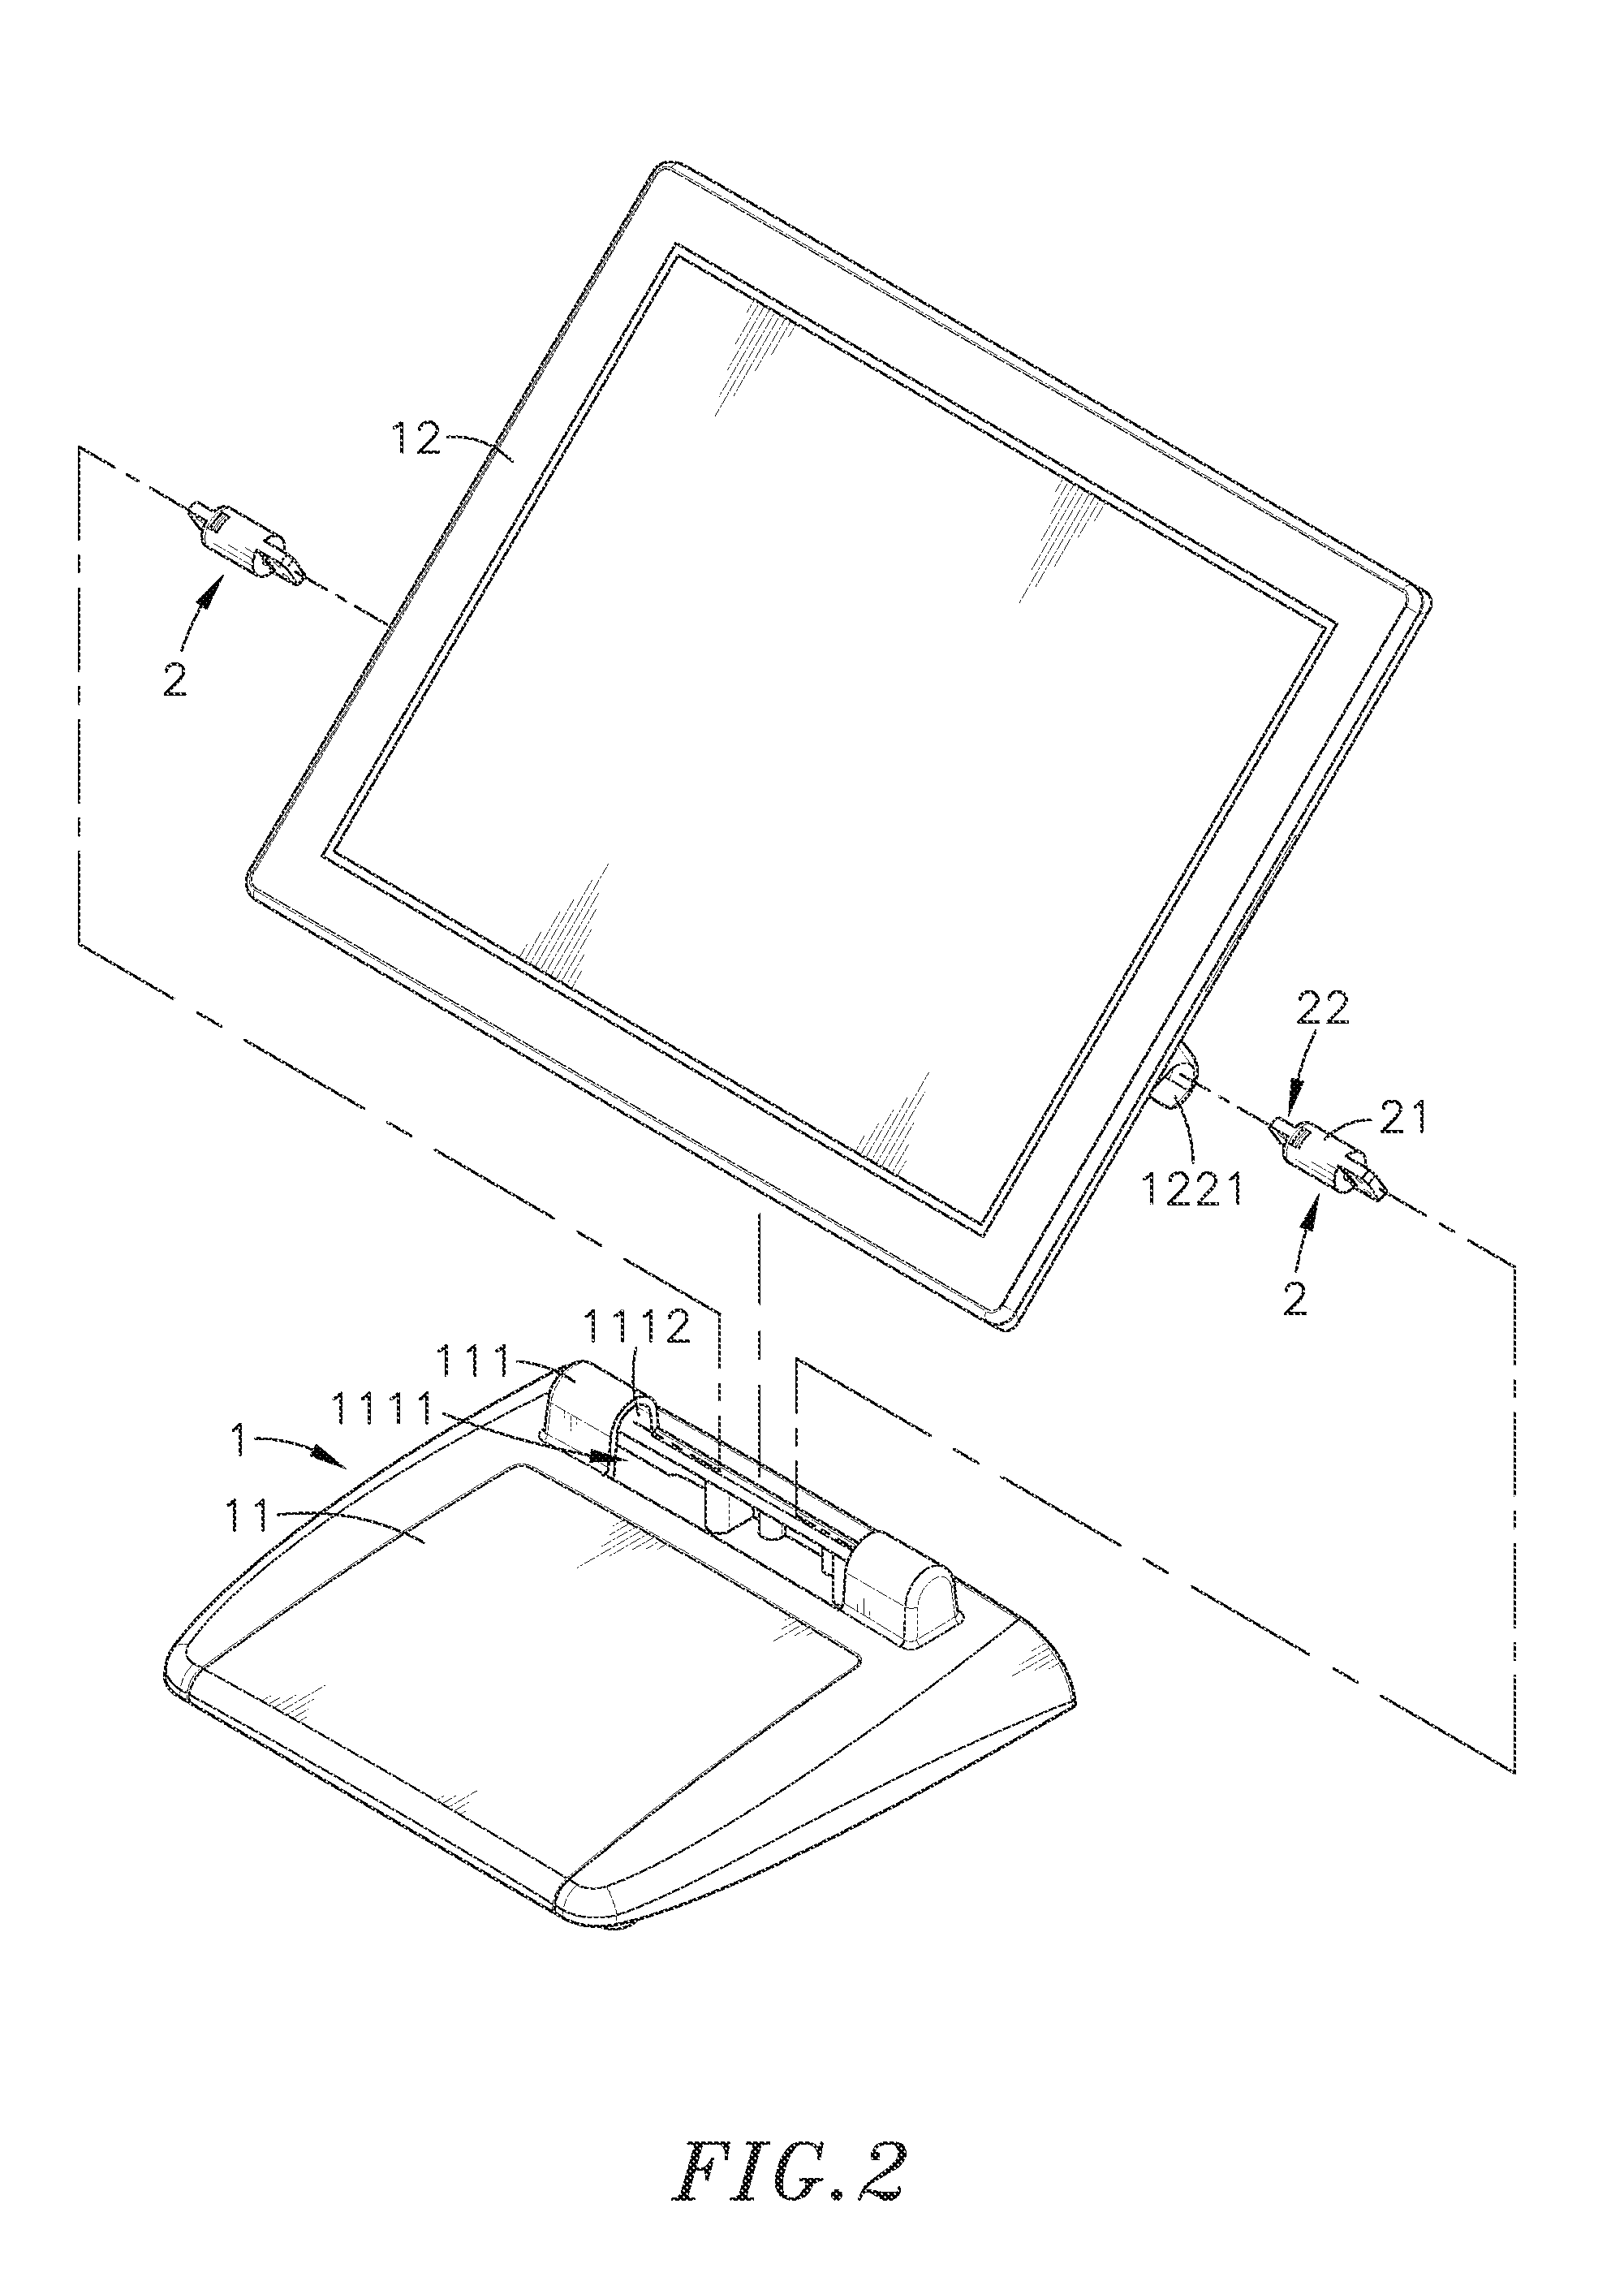 Electronic device and hinge assembly